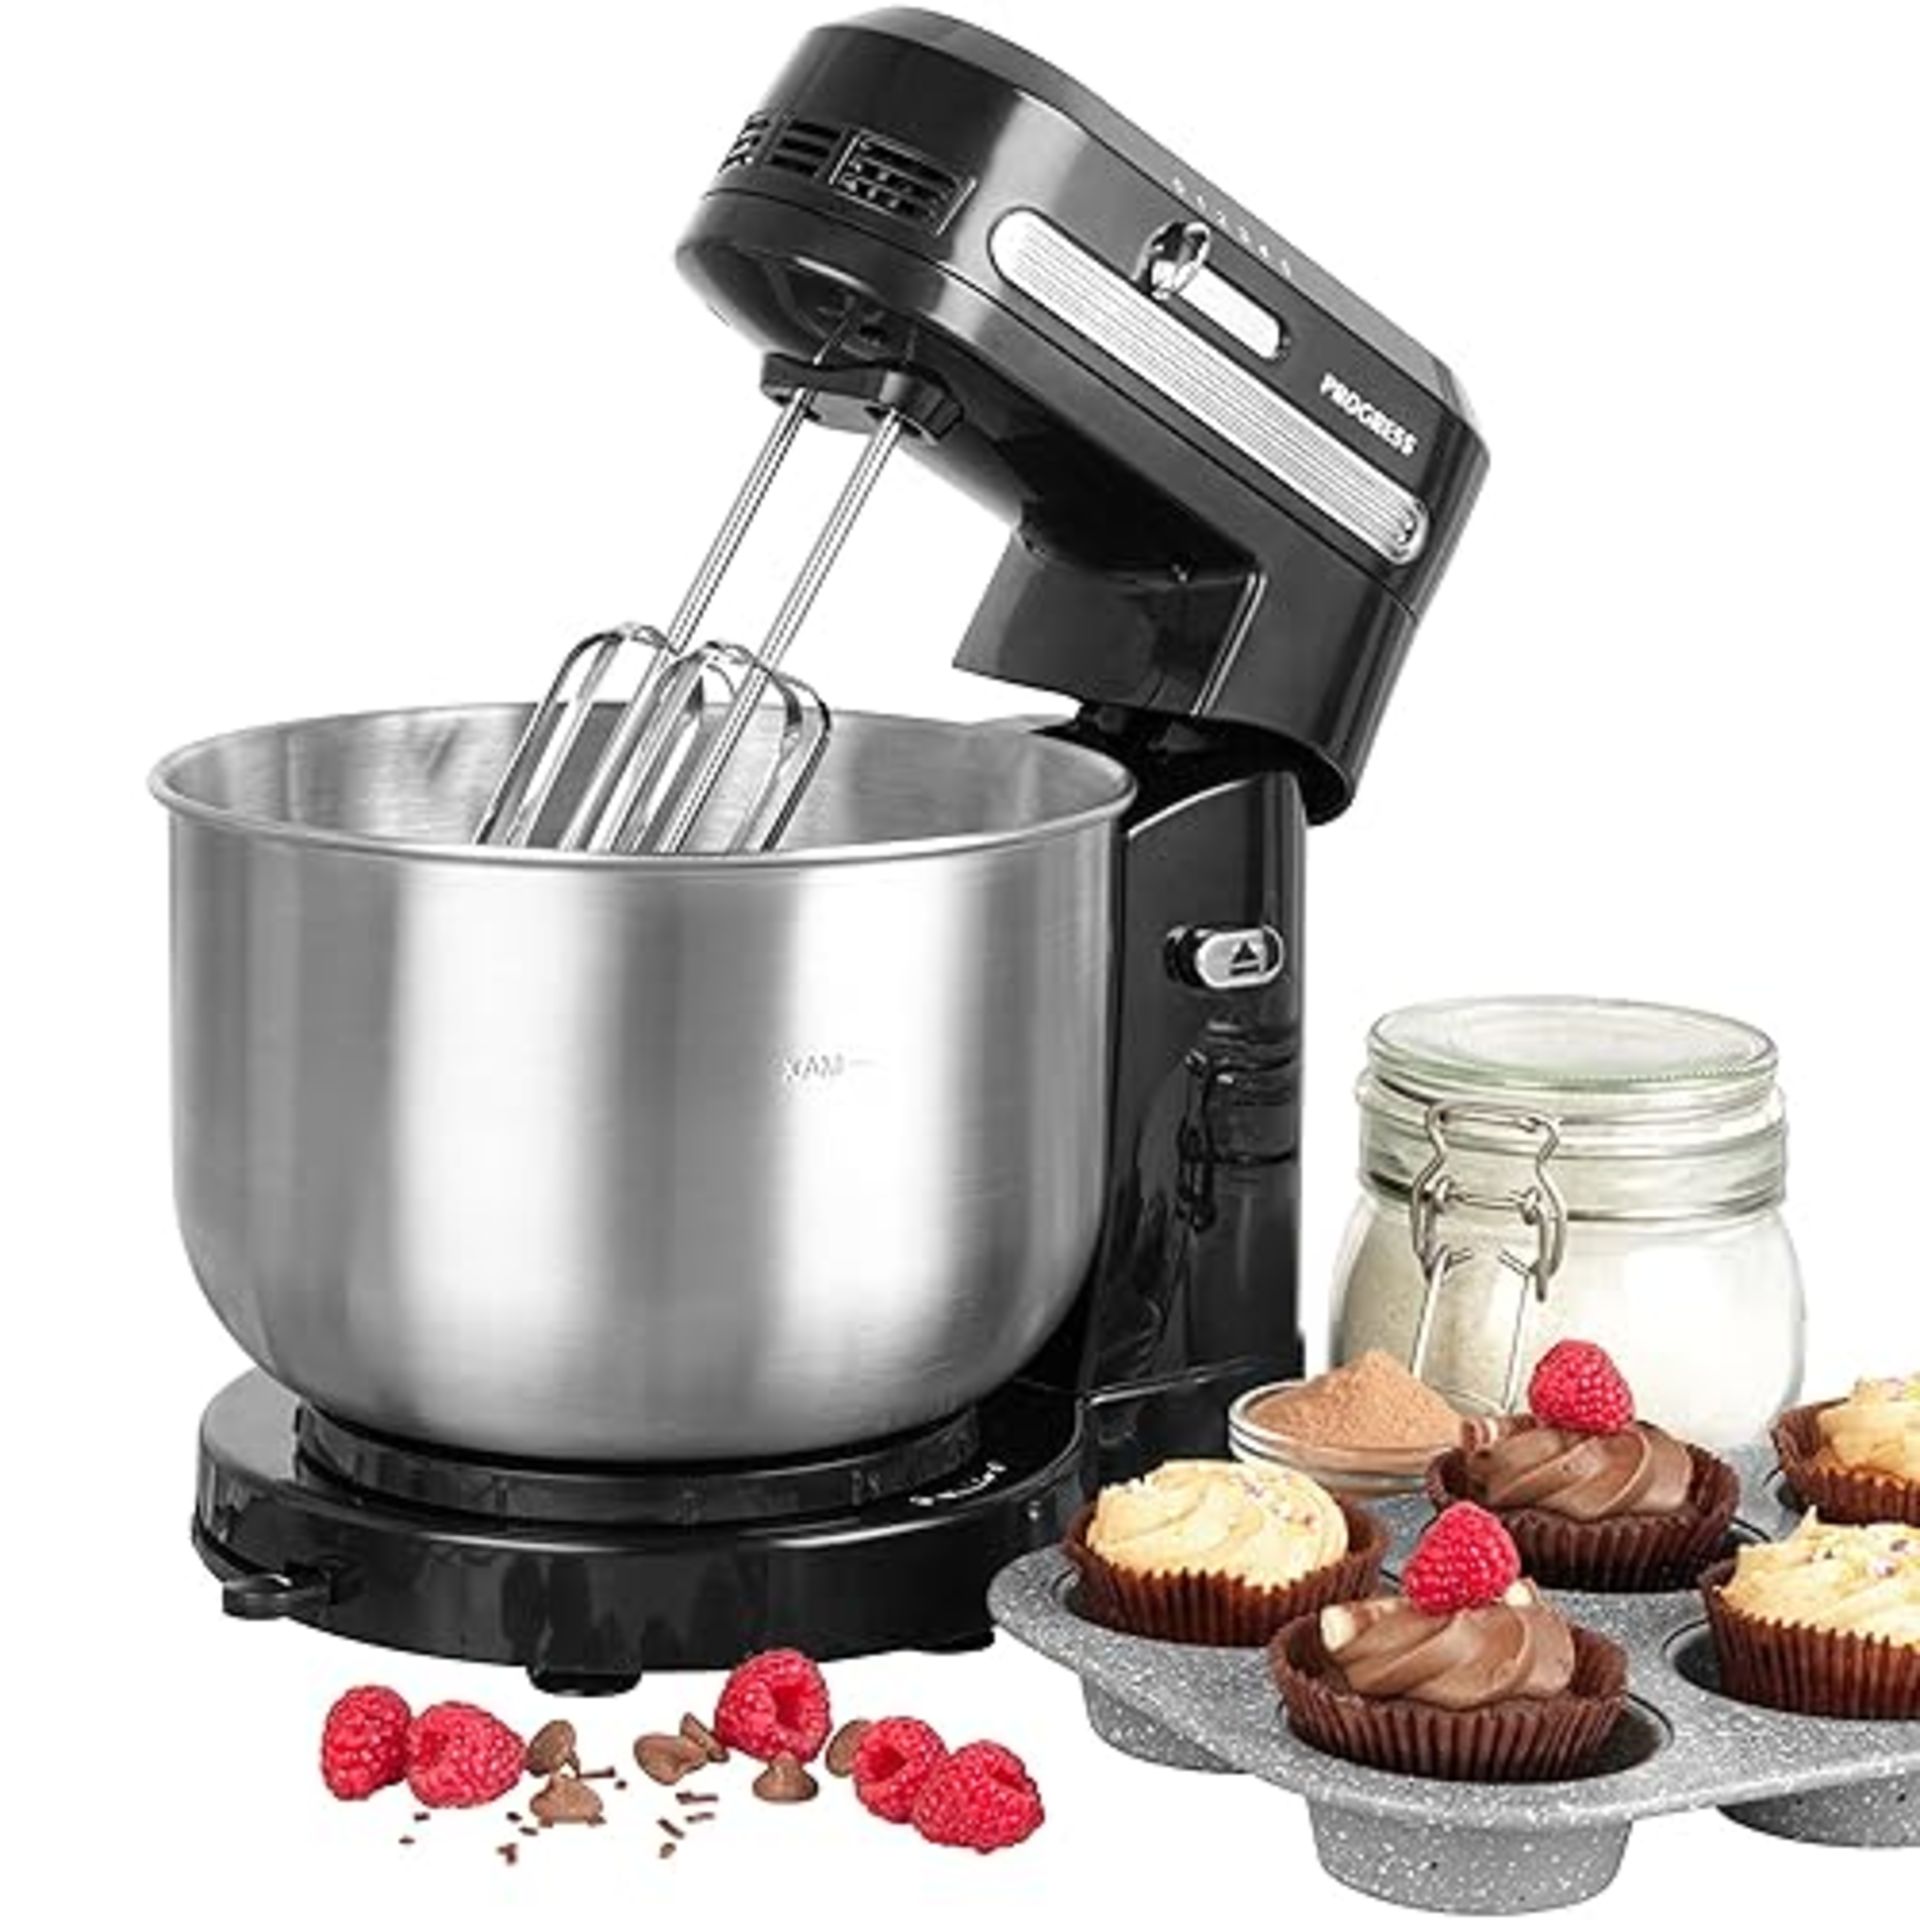 Progress EK4470P Electric Stand Mixer - 3.5L Rotating Stainless Steel Mixing Bowl, 5 Speeds, Includ